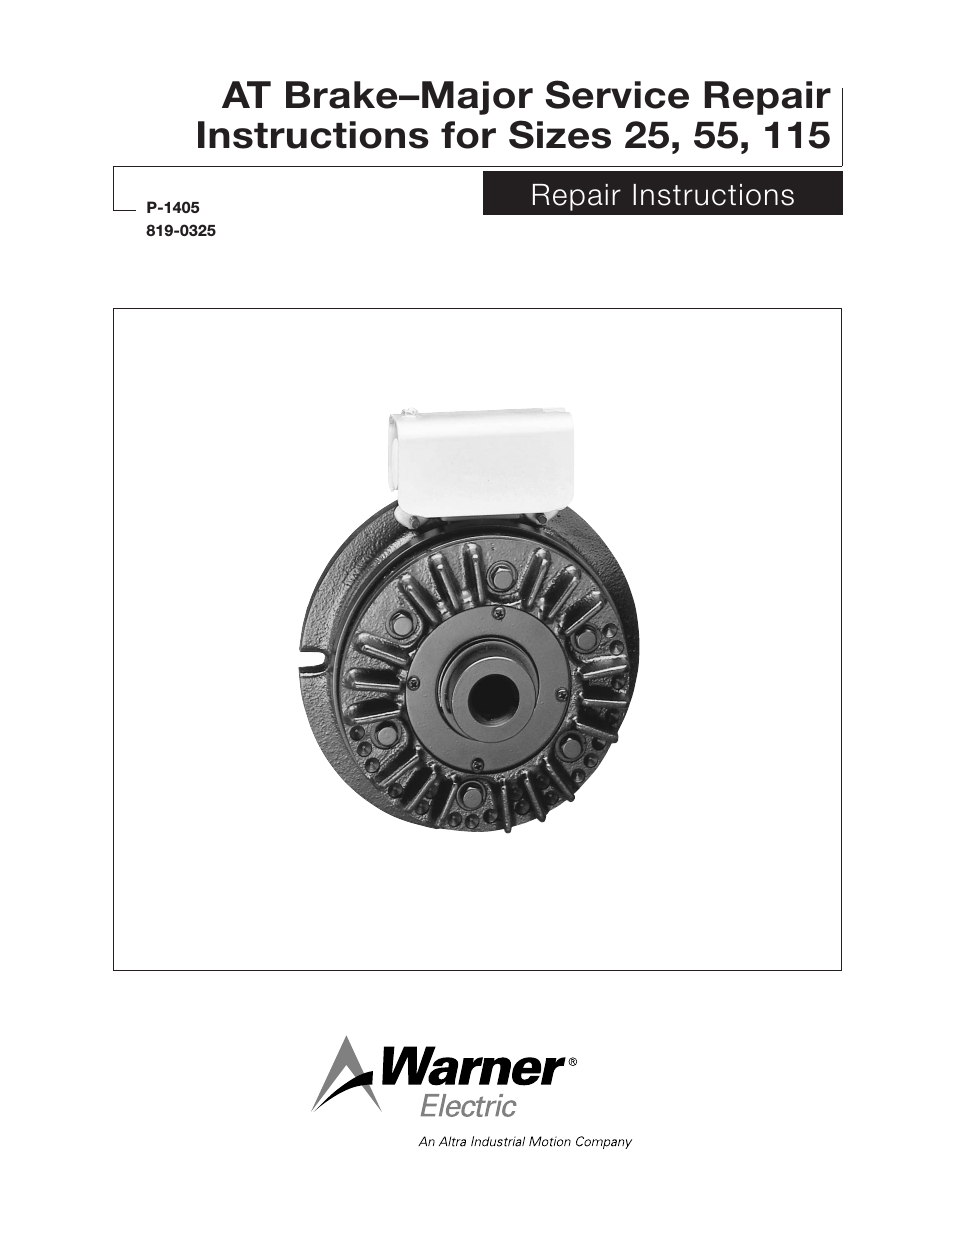 AT Brake–Major Service Repair Instructions for Sizes 25, 55, 115